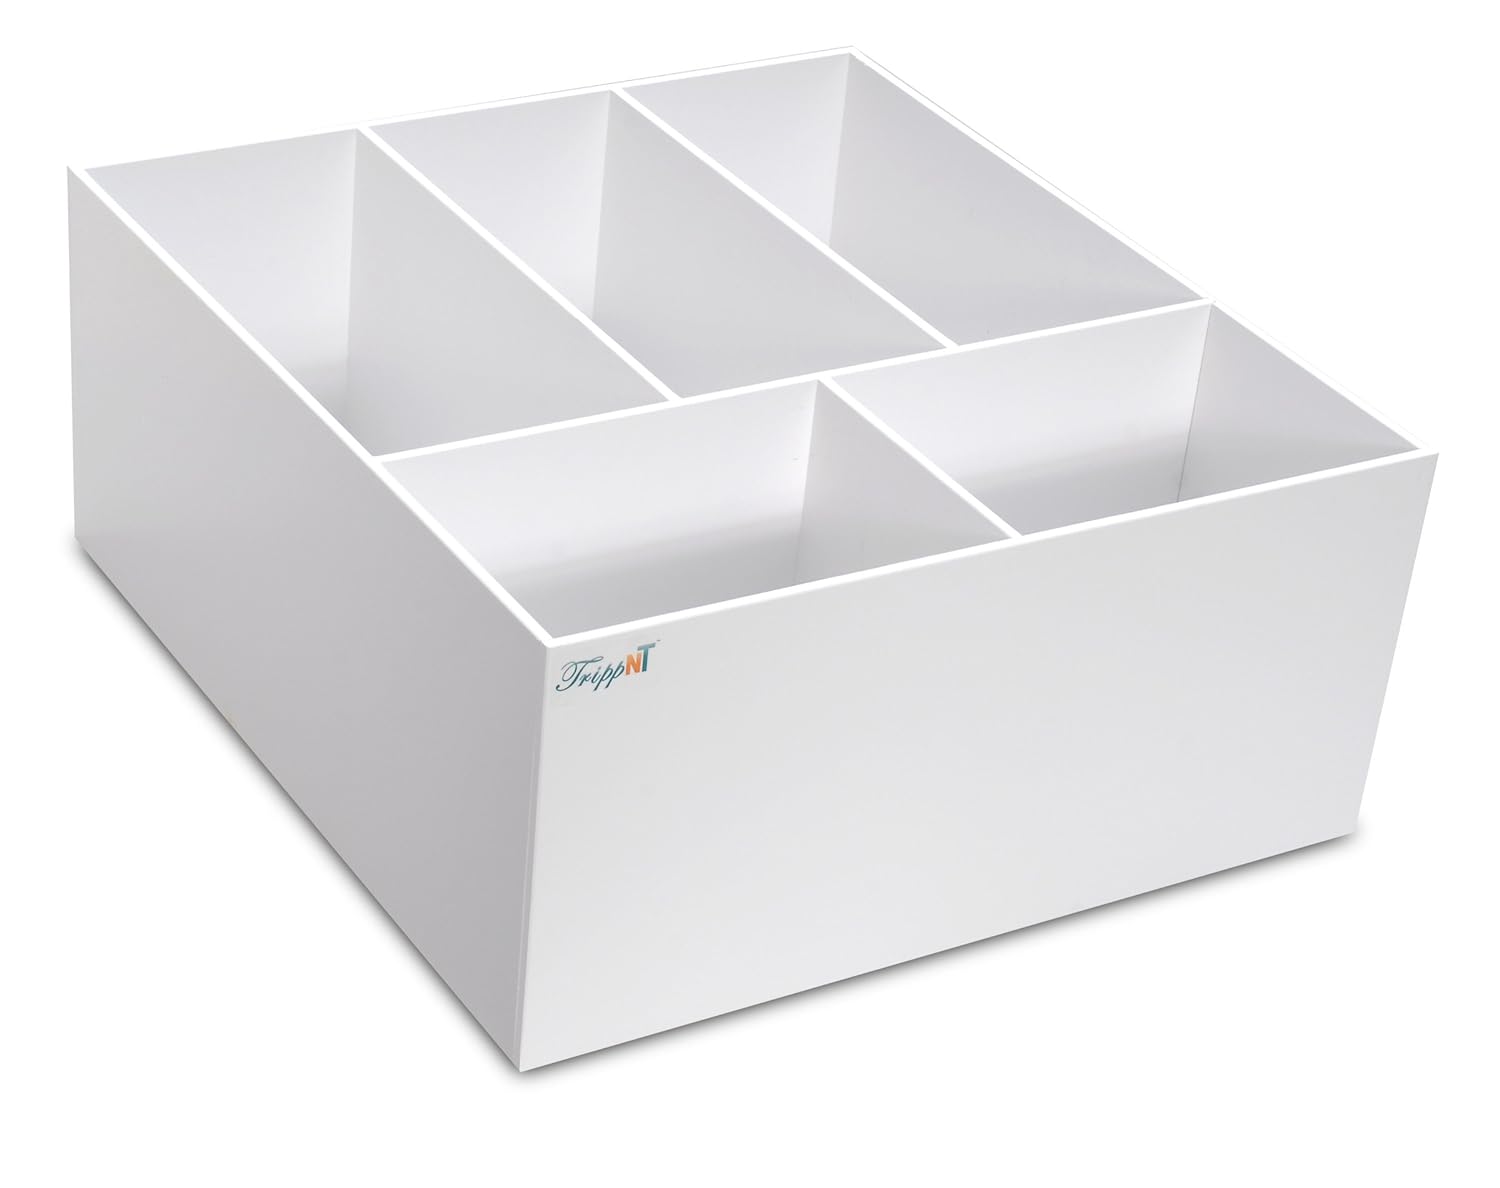 Generic TrippNT 50549 White PVC Plastic 8" Extra Deep Drawer Organizer, 5 Compartments, 17.5" Width x 8" Height x 19.5